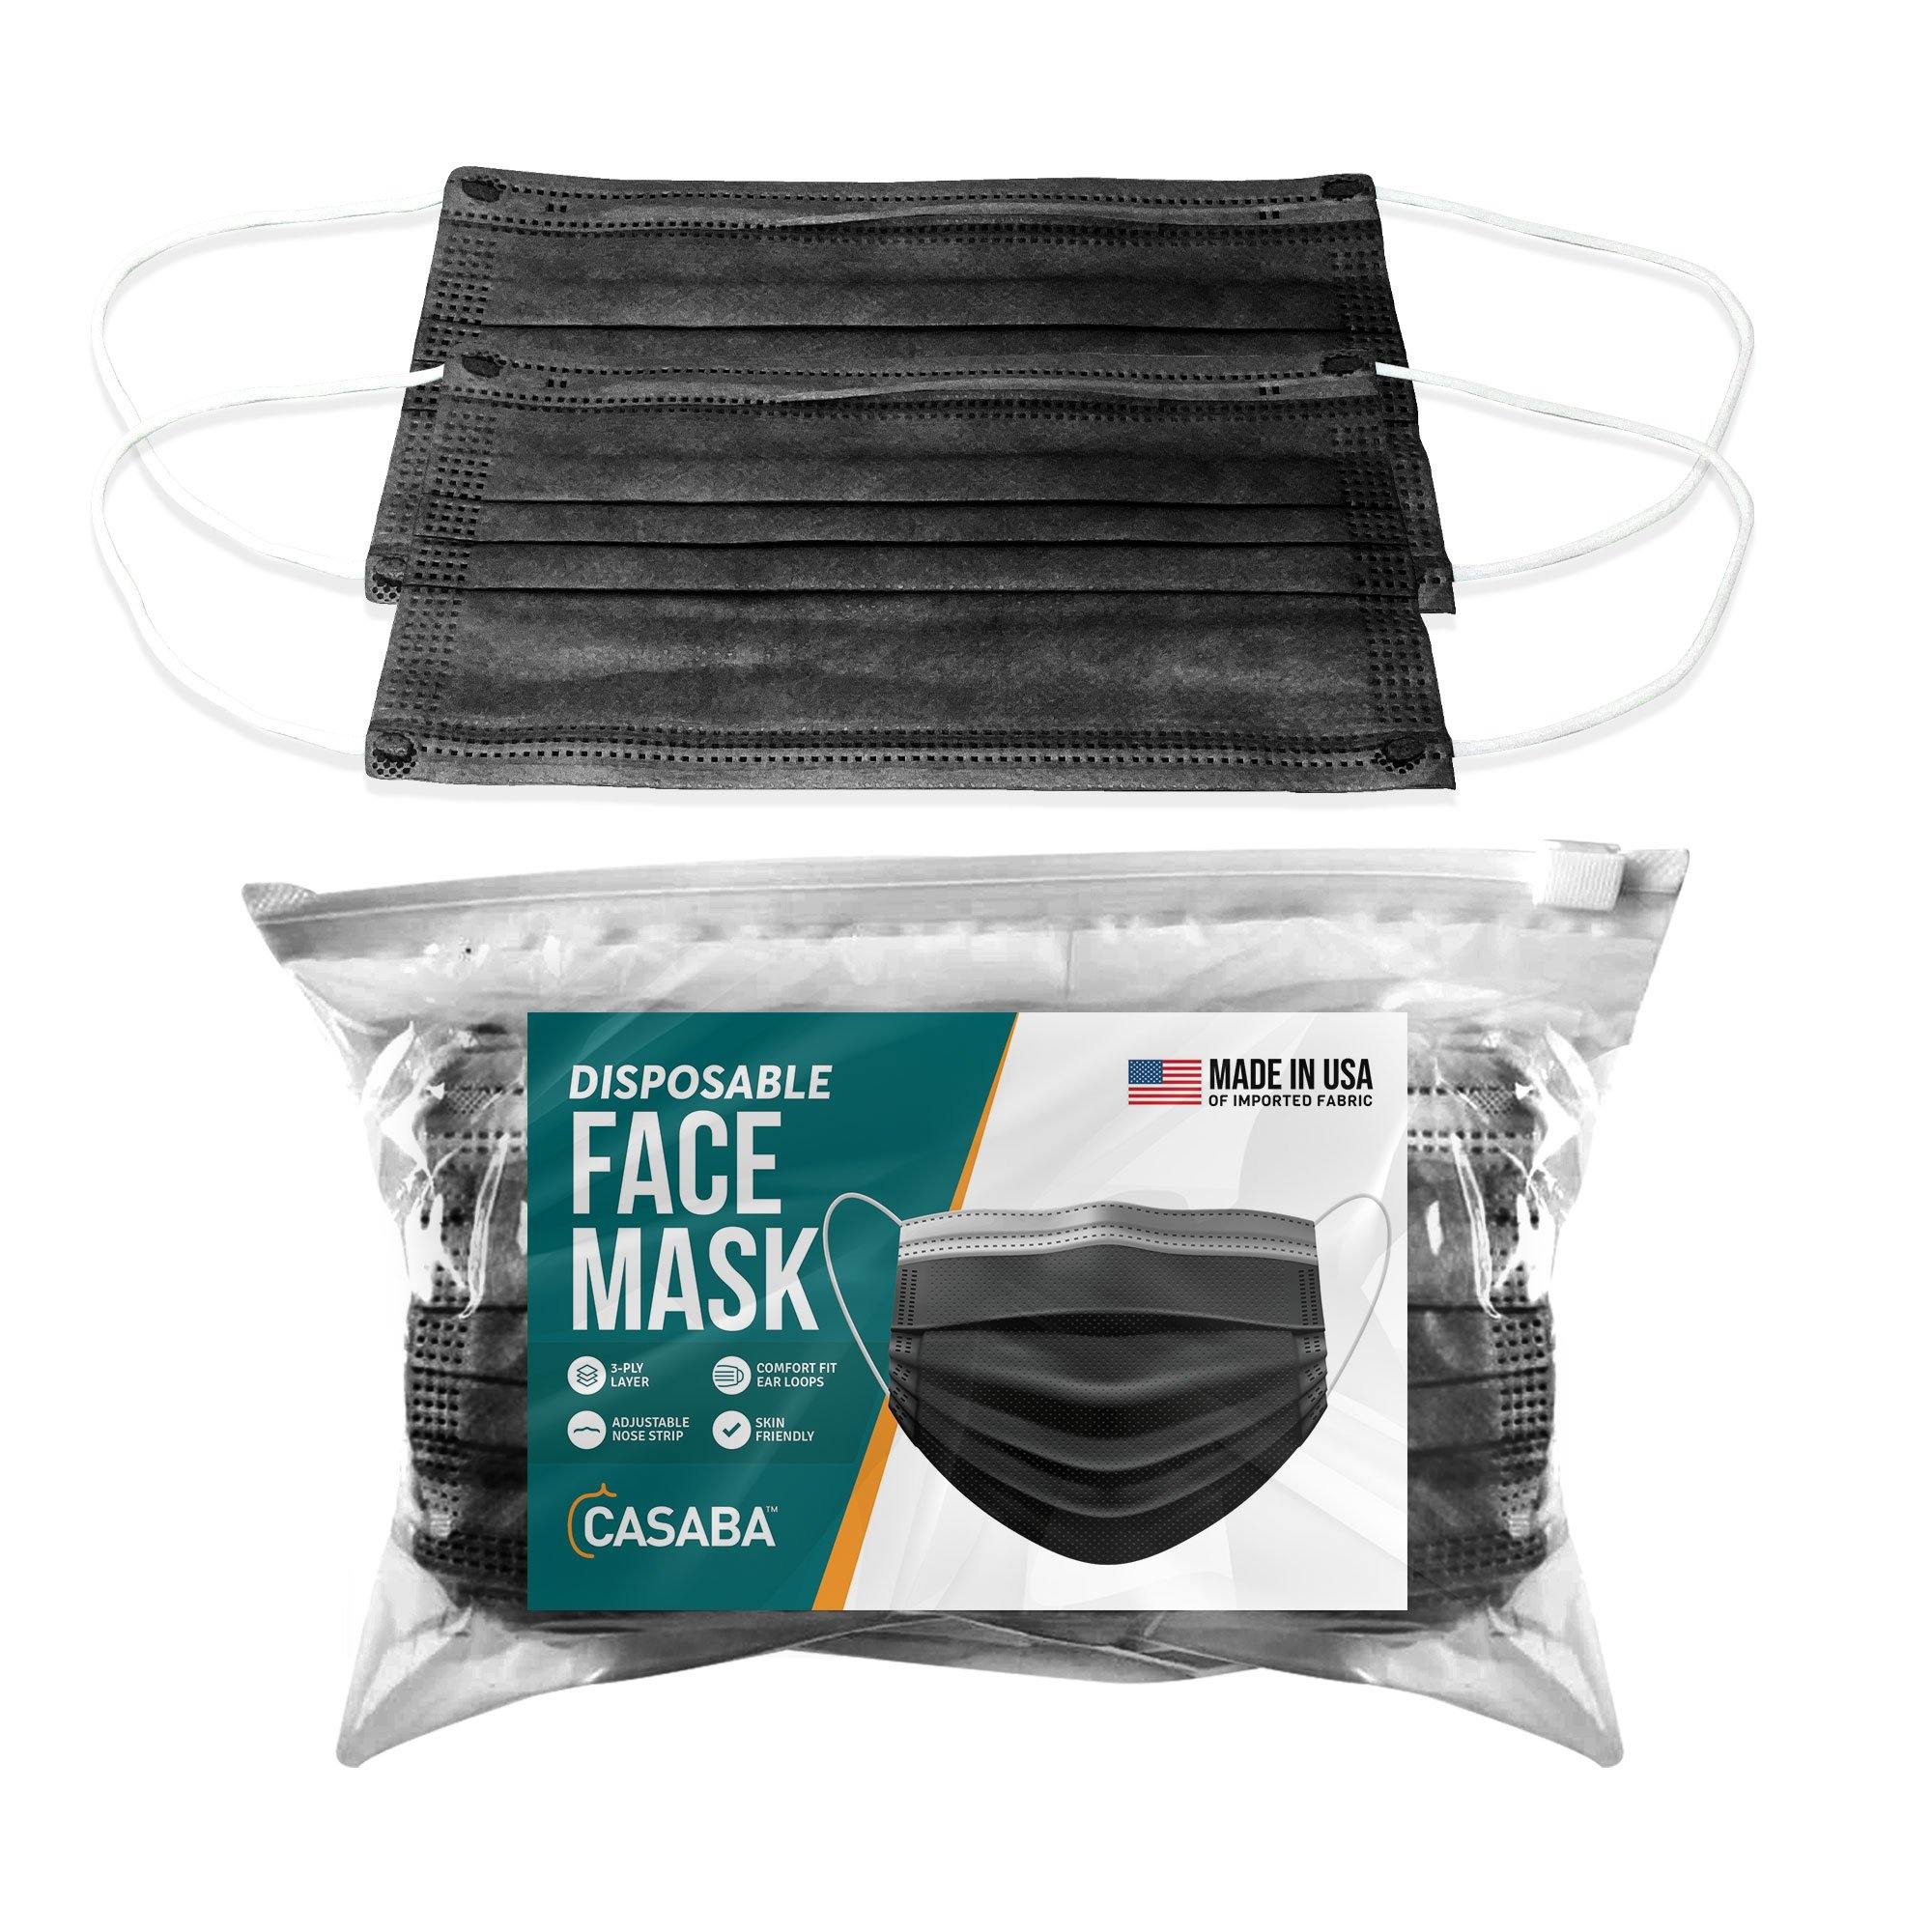 Casaba 50 Pack Black Disposable Face Masks 3-Ply Filter - Made in USA with Imported Fabric